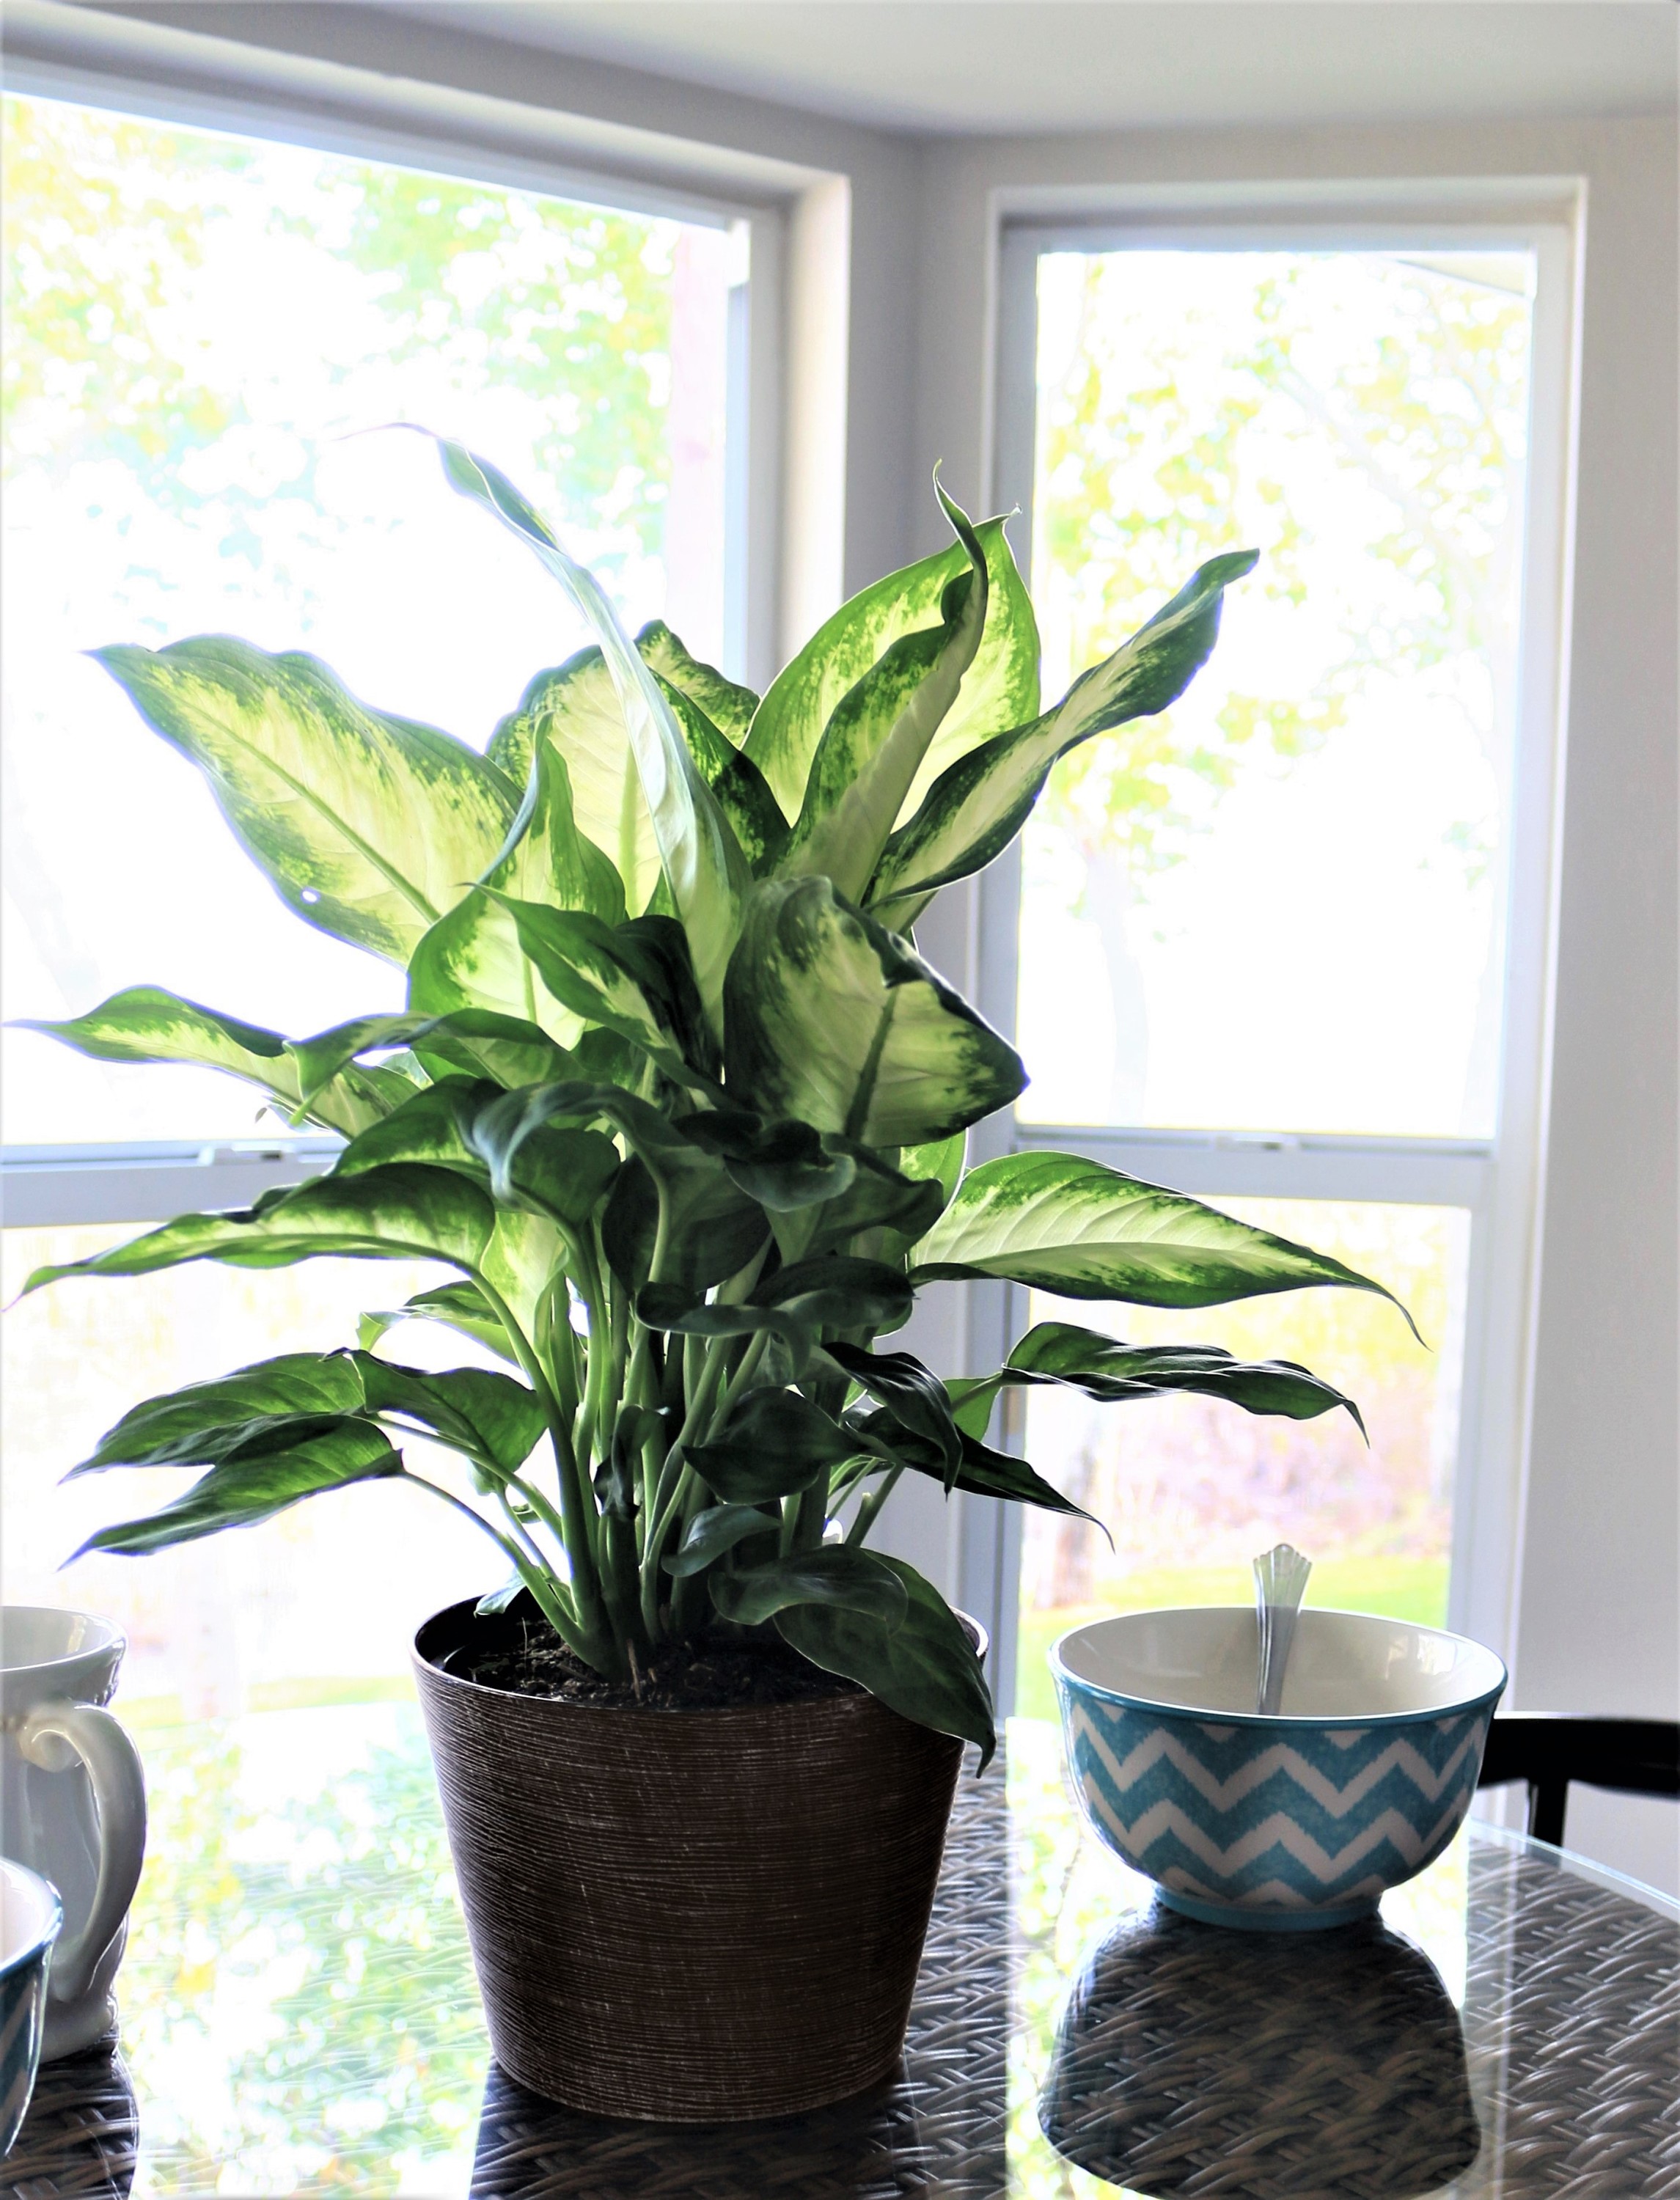 Costa Farms Live Indoor 12in. Tall Multicolor Dieffenbachia, Indirect Sunlight, Plant in 6in. Grower Pot - image 5 of 10